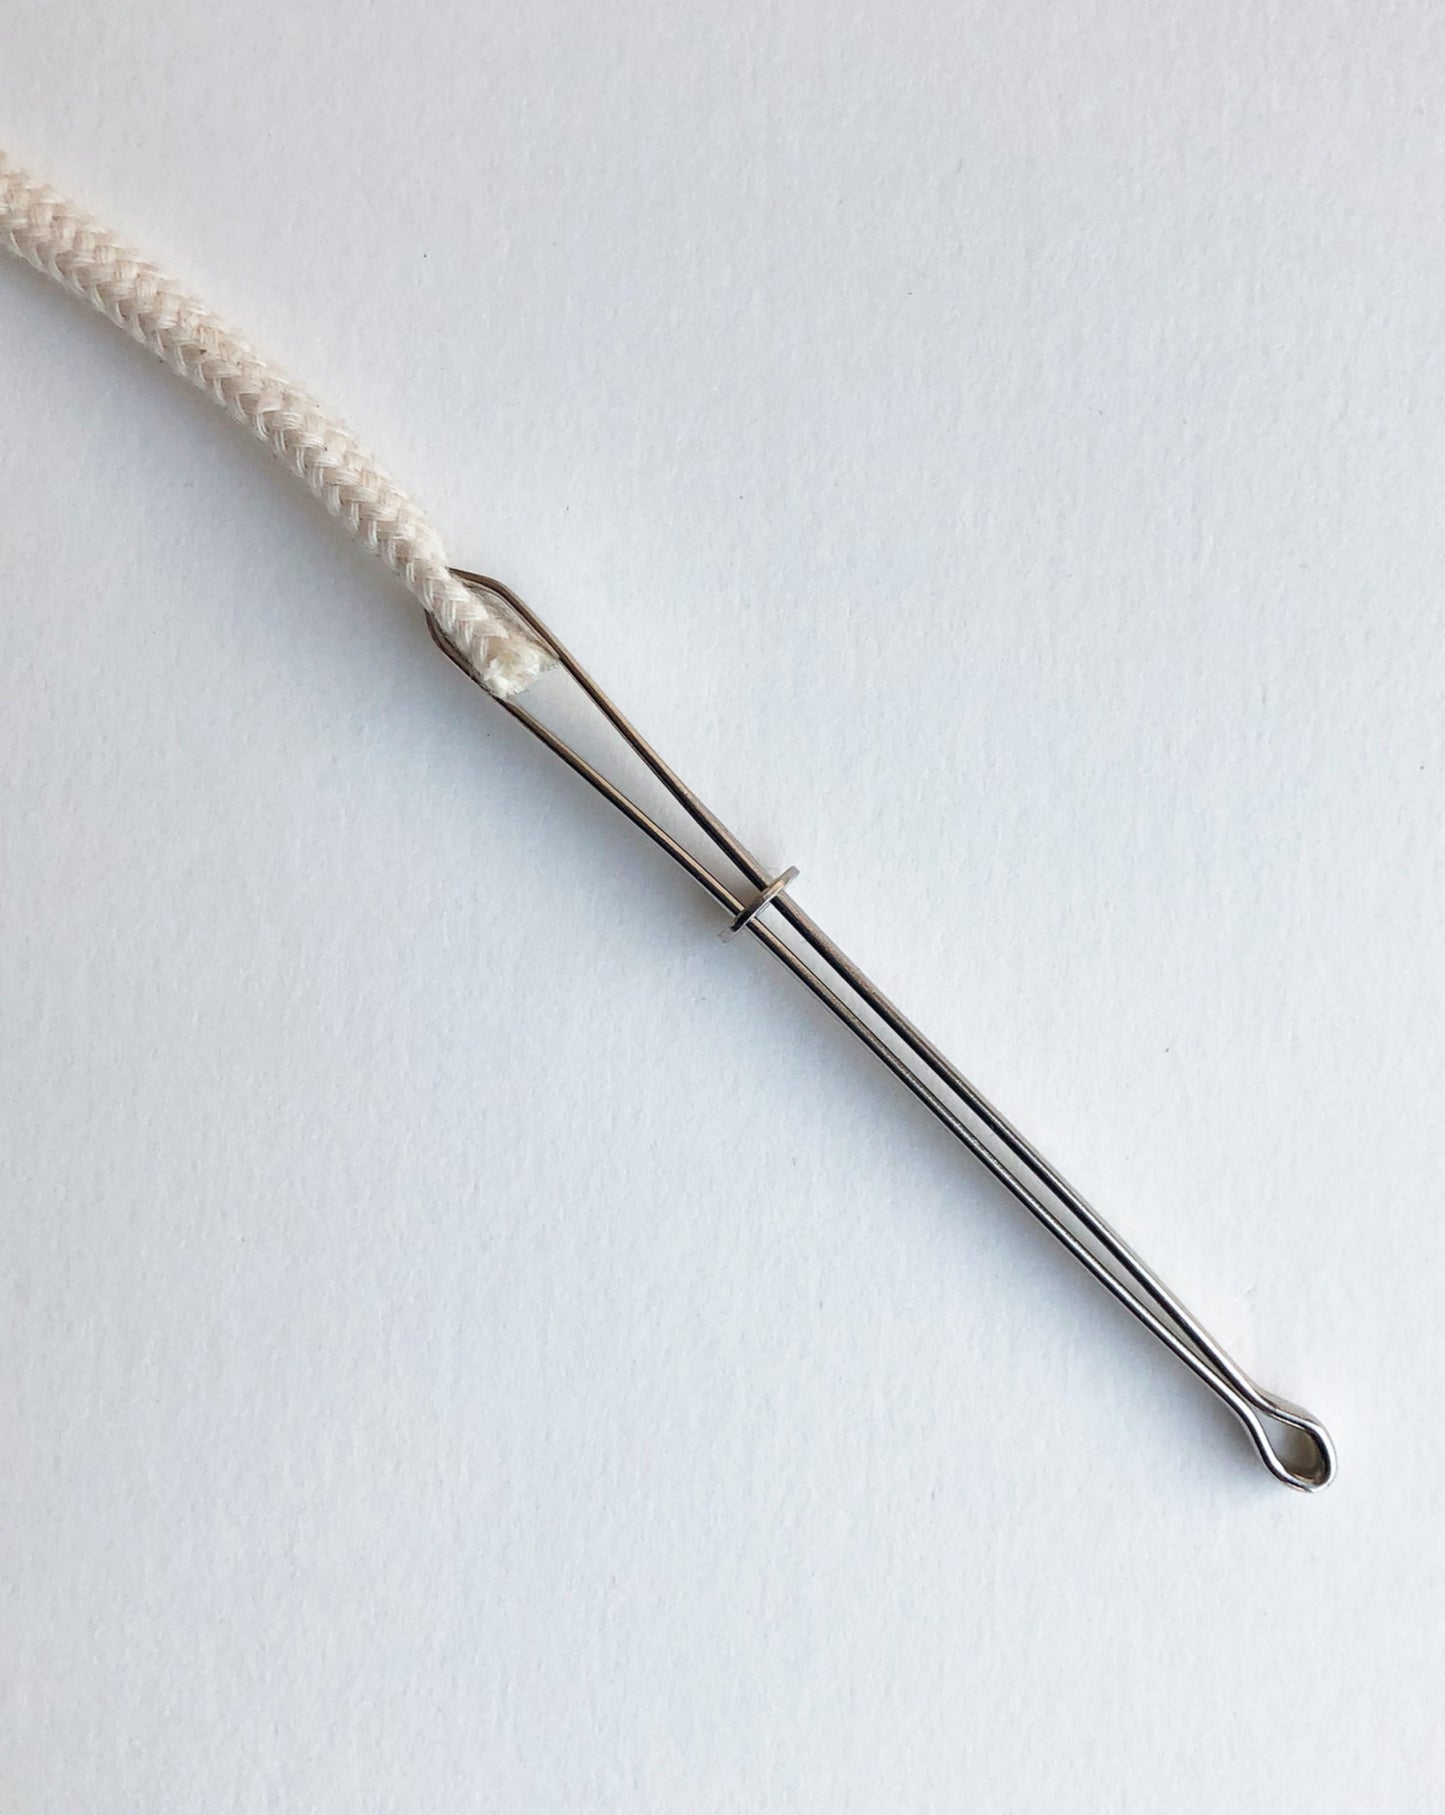 A bodkin will be opened and closed by sliding a little metal ring. Open to insert a string or ruber band, close to secure them in between tweezers, then the bodkin will be threaded the casing.